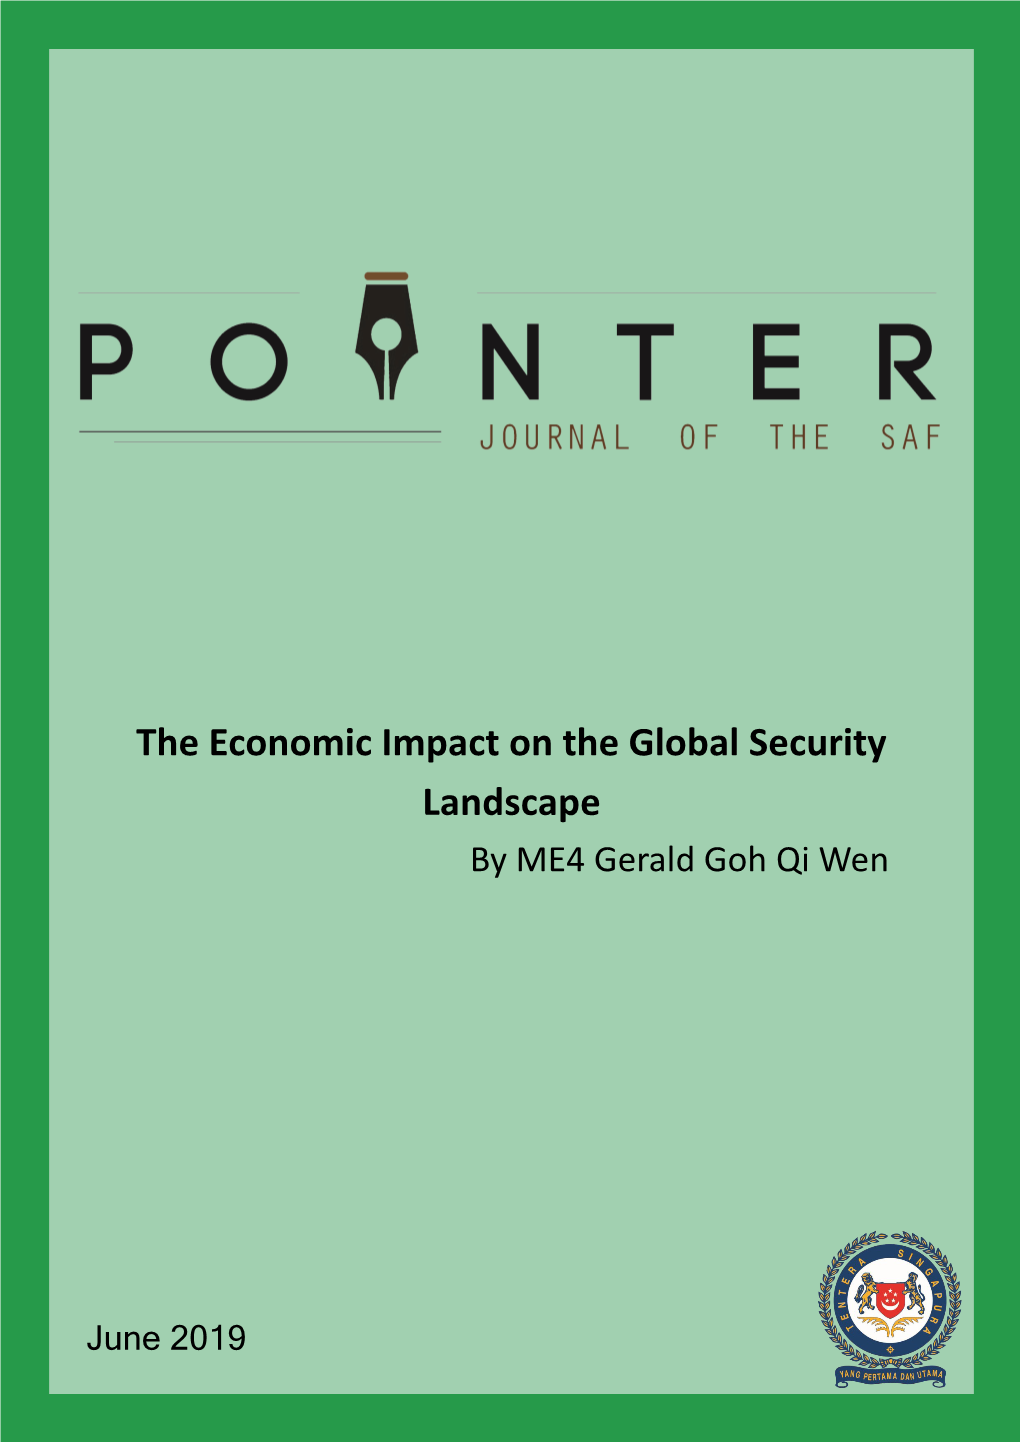 The Economic Impact on the Global Security Landscape by ME4 Gerald Goh Qi Wen